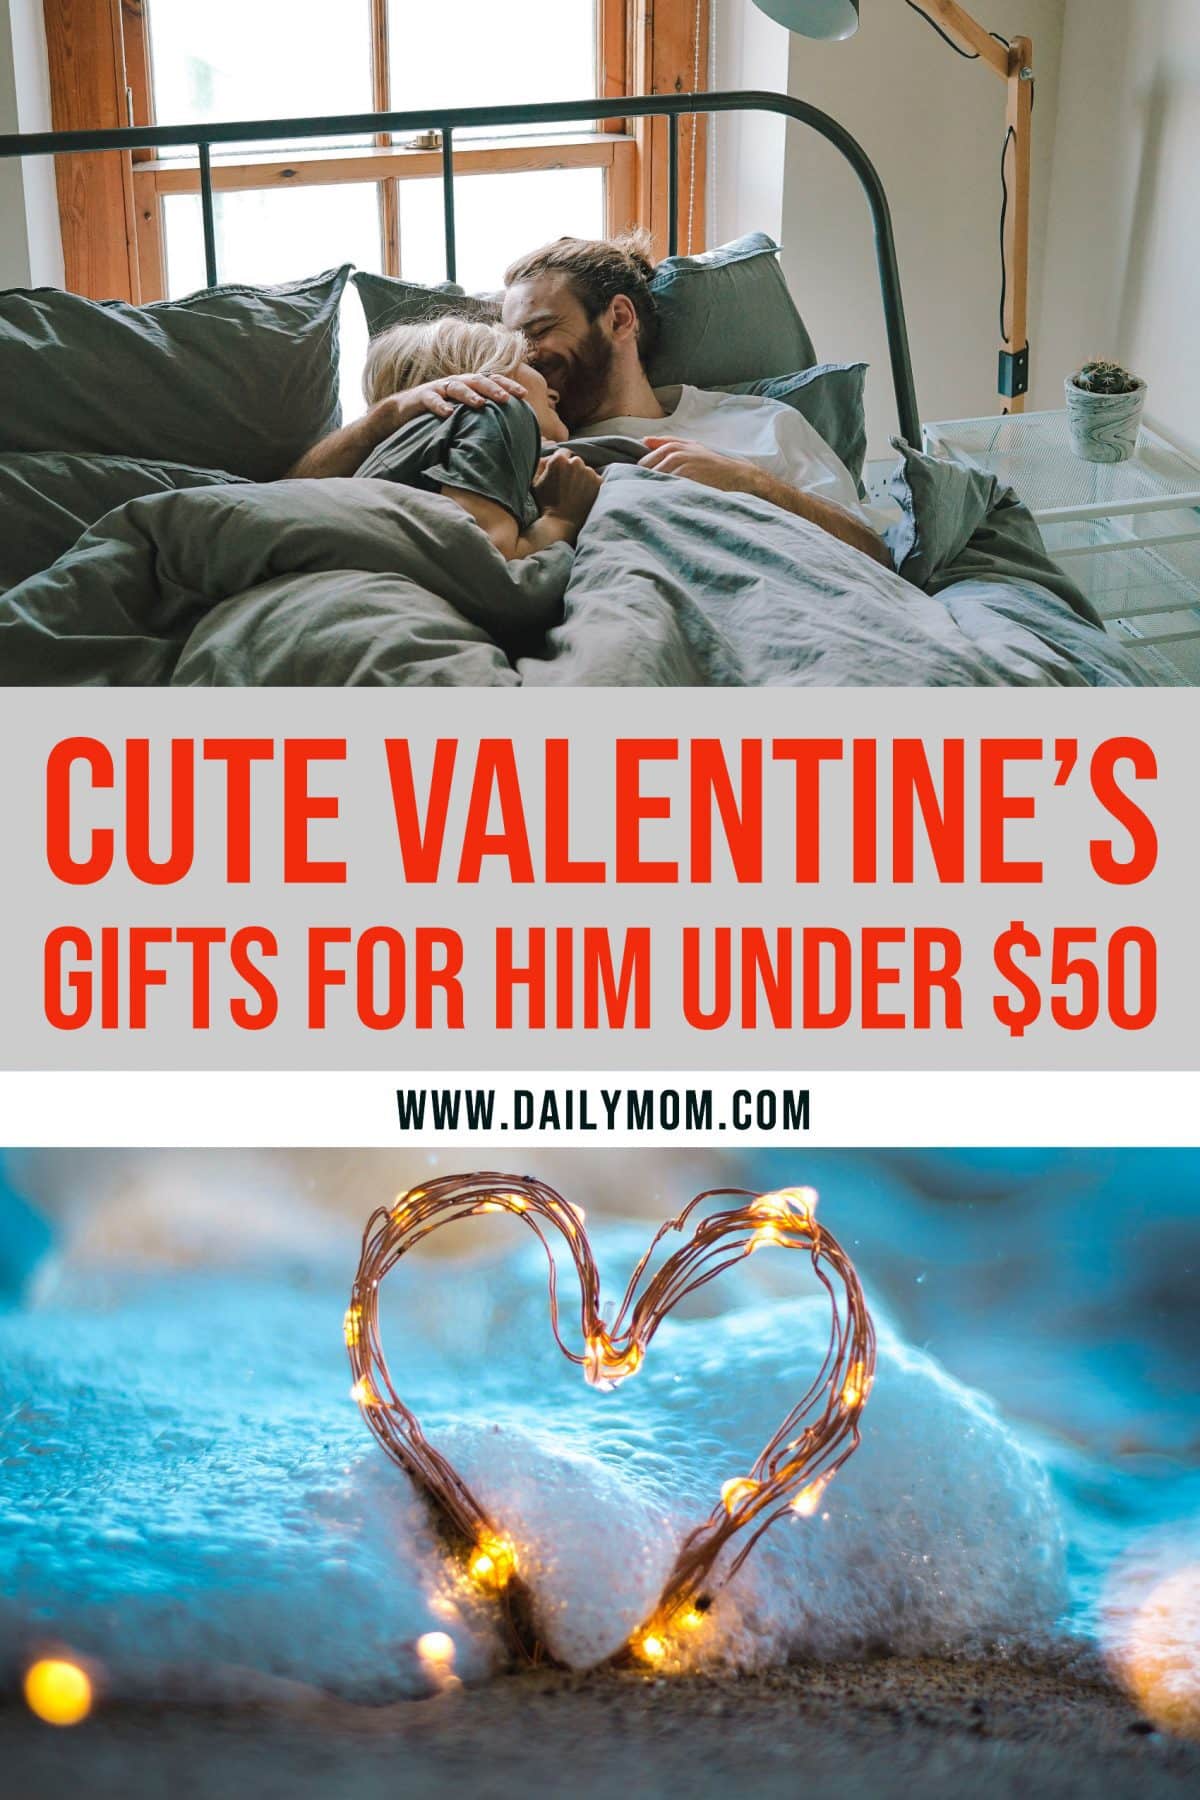 Daily Mom Parents Portal Cute Valentine'S Day Gifts For Him Under $50